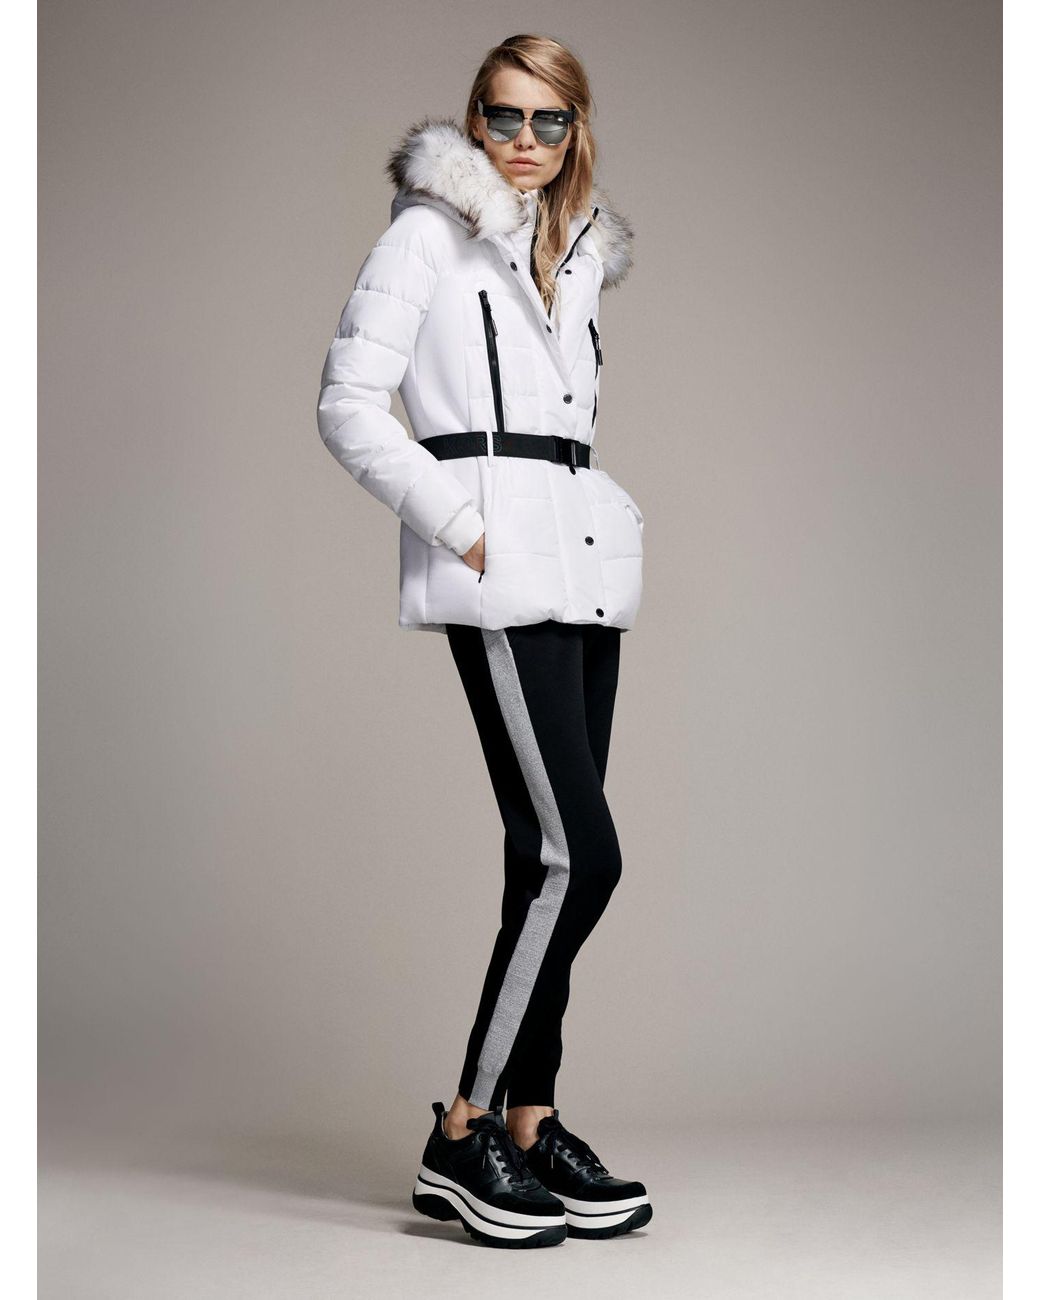 Michael Kors Faux Fur-trimmed Belted Puffer Jacket in White | Lyst